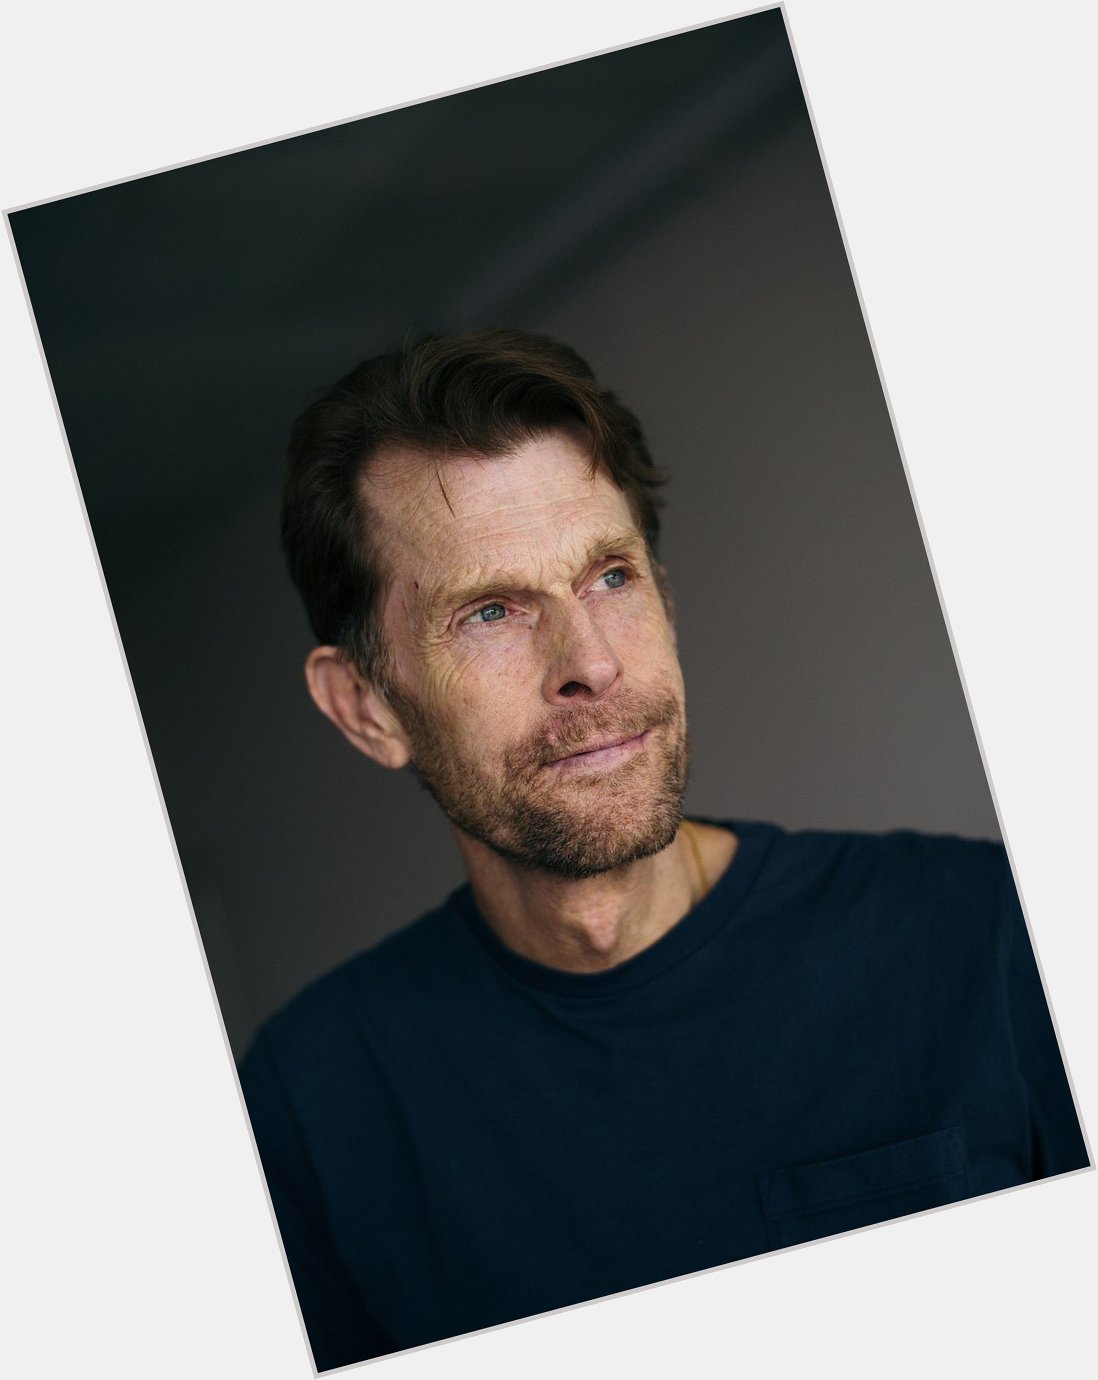 Happy birthday to Kevin Conroy! undoubtedly the definitive voice of the worlds greatest detective 